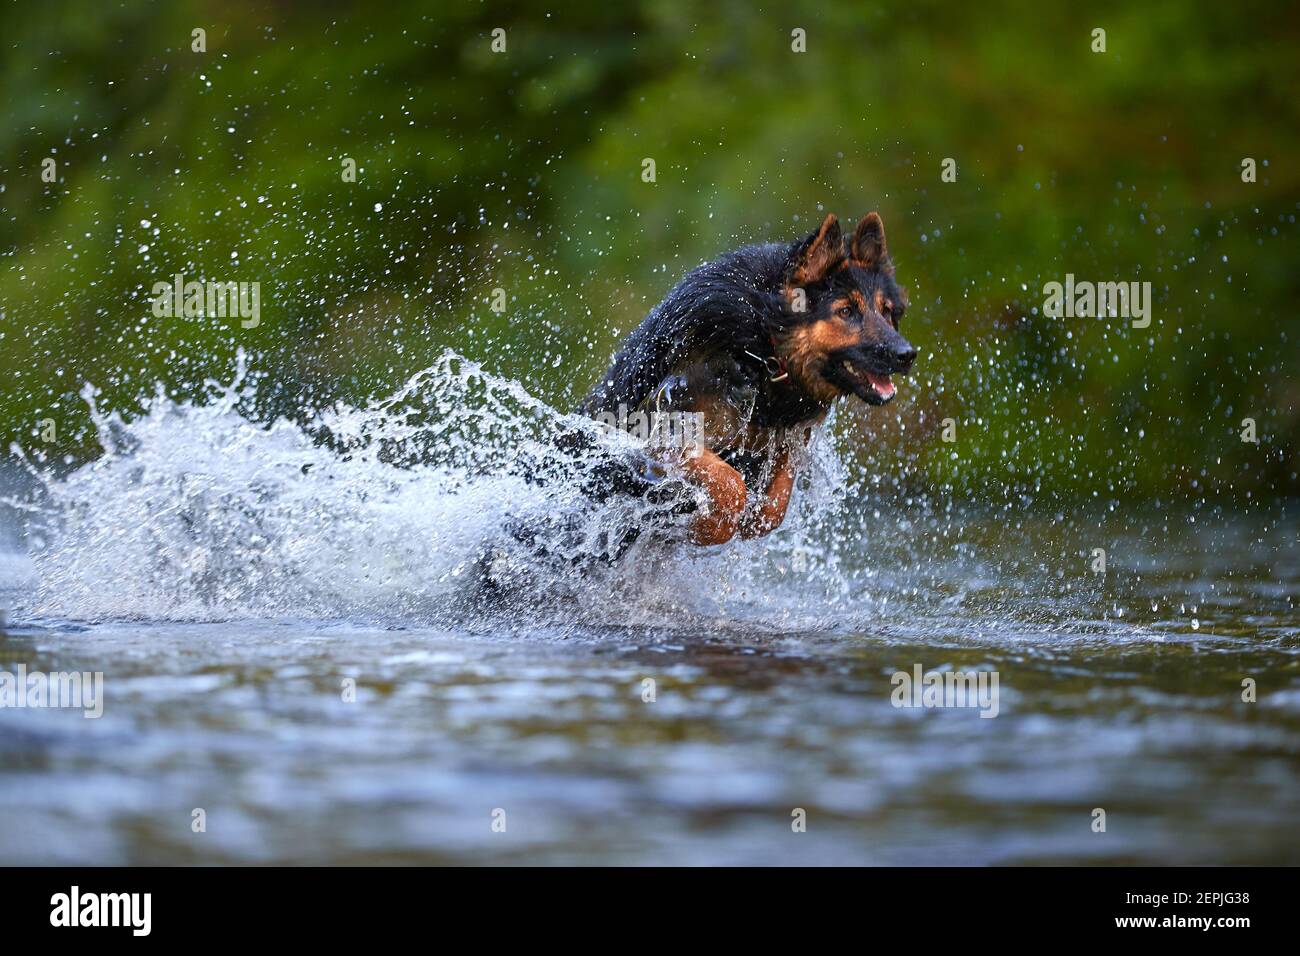 https://c8.alamy.com/comp/2EPJG38/hairy-dog-jumping-in-splashing-water-of-a-river-head-illuminated-by-sun-against-dark-background-actions-training-games-with-dog-in-water-bohemian-2EPJG38.jpg